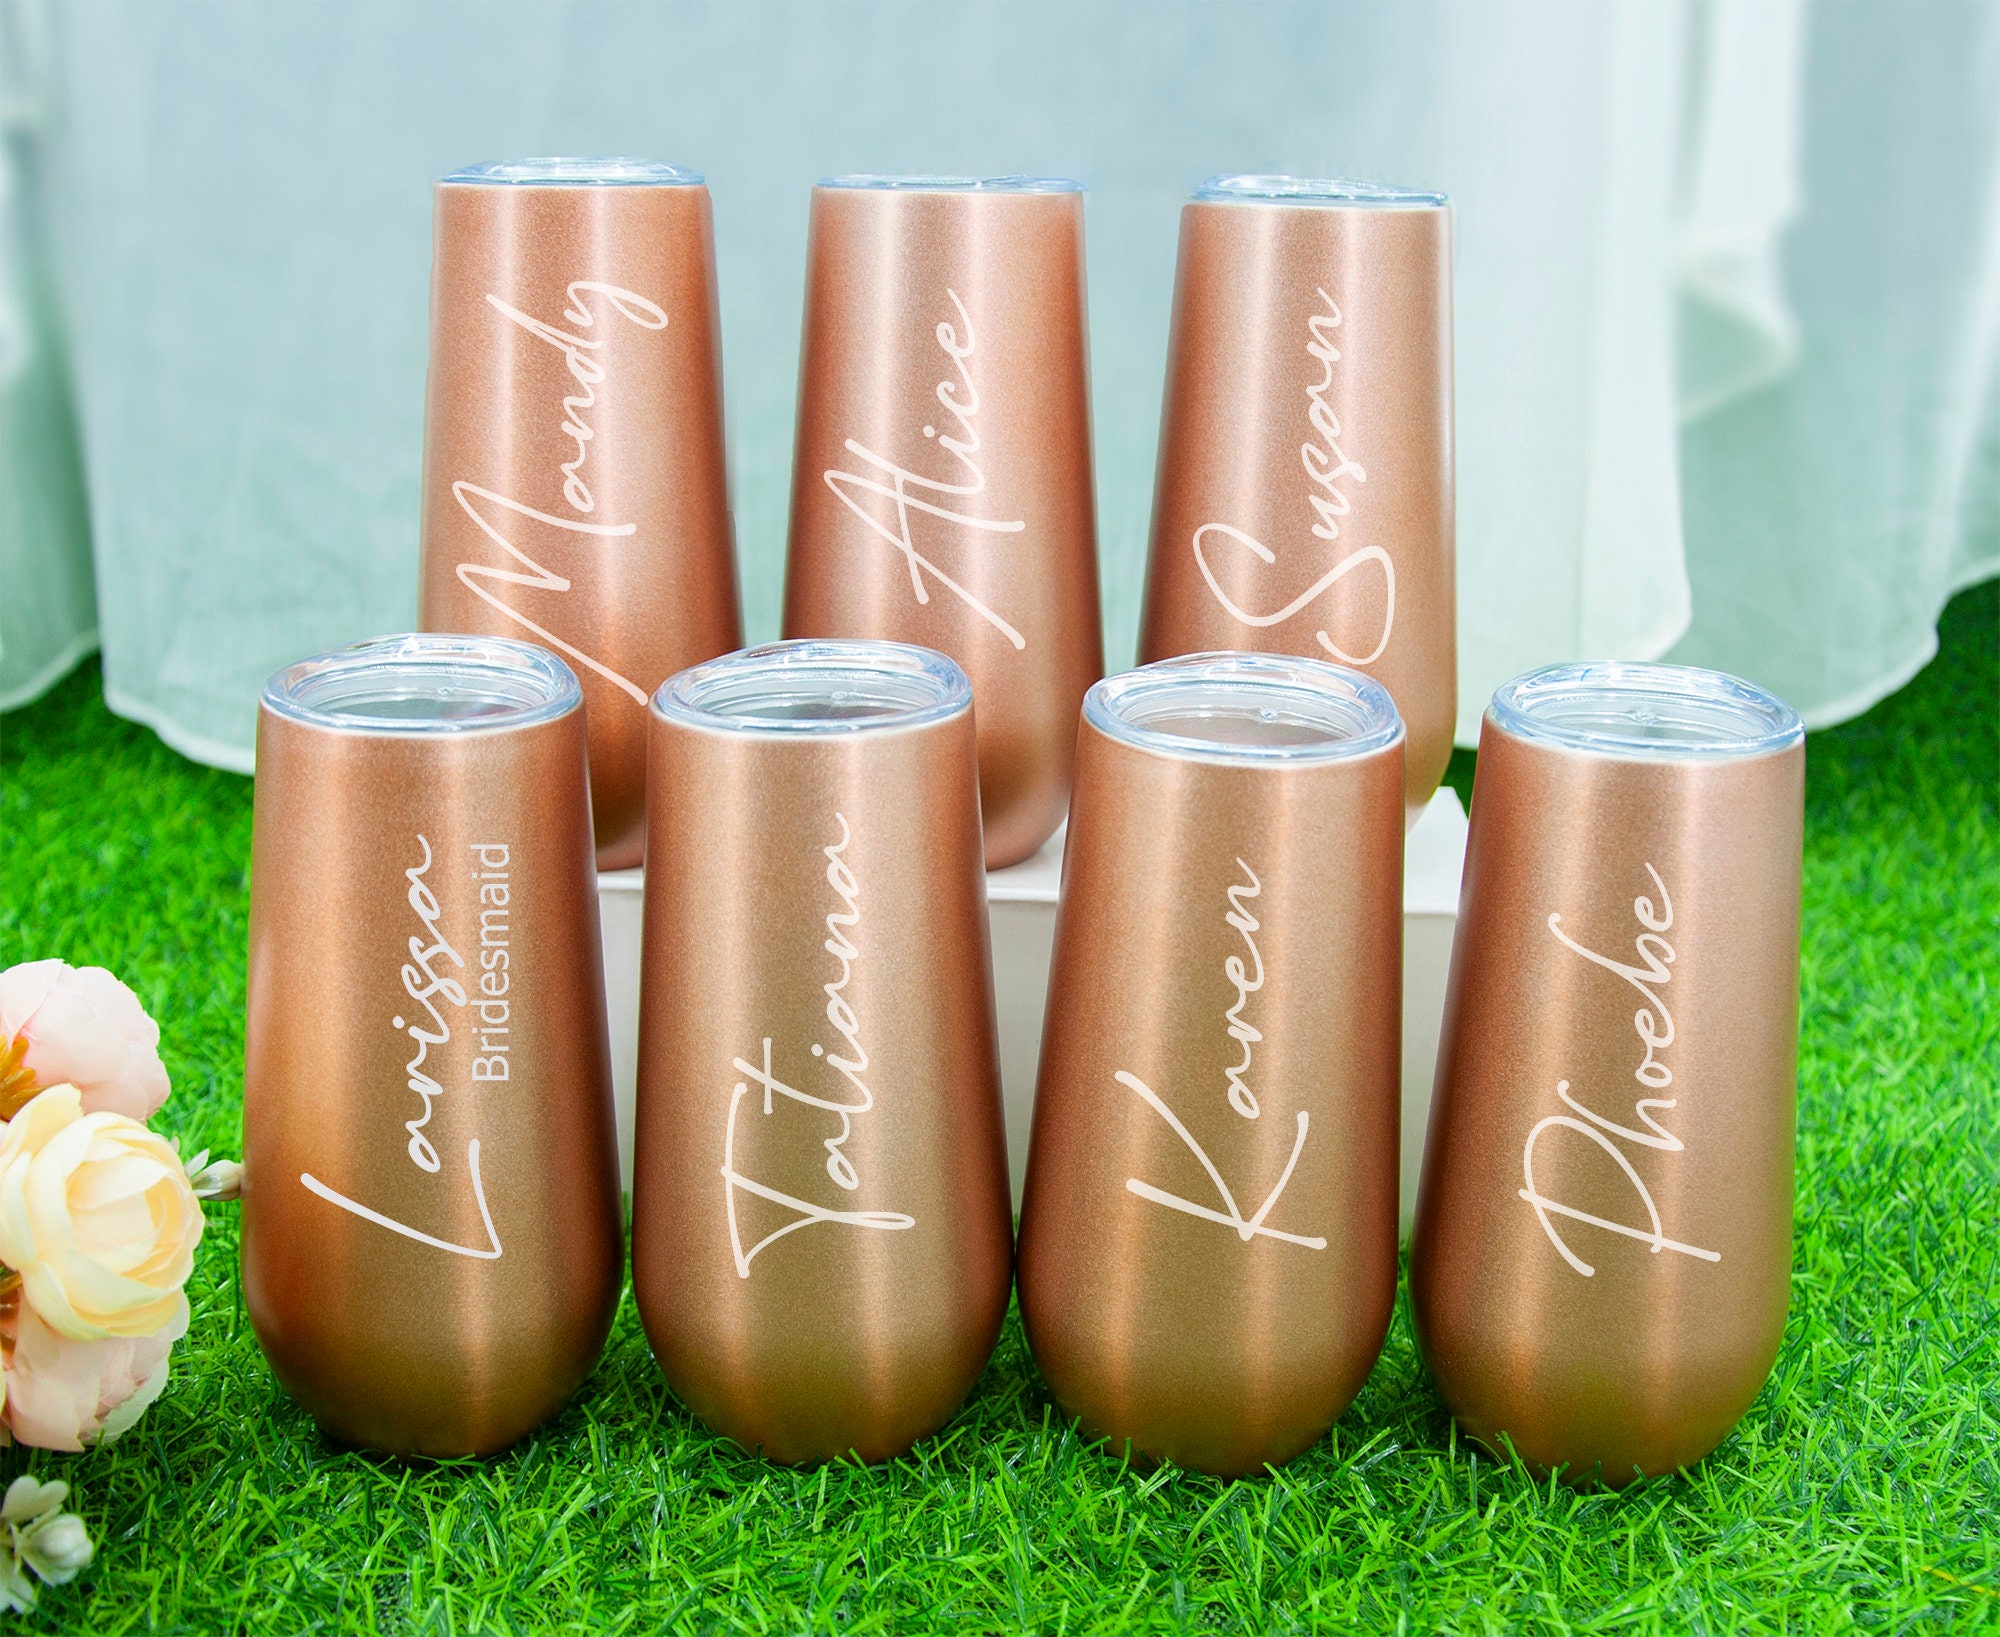 8 Pcs Bridesmaid Tumblers Bridesmaid Cups 304 Stainless Steel Bride Mugs  Maid of Honor Champagne Tum…See more 8 Pcs Bridesmaid Tumblers Bridesmaid